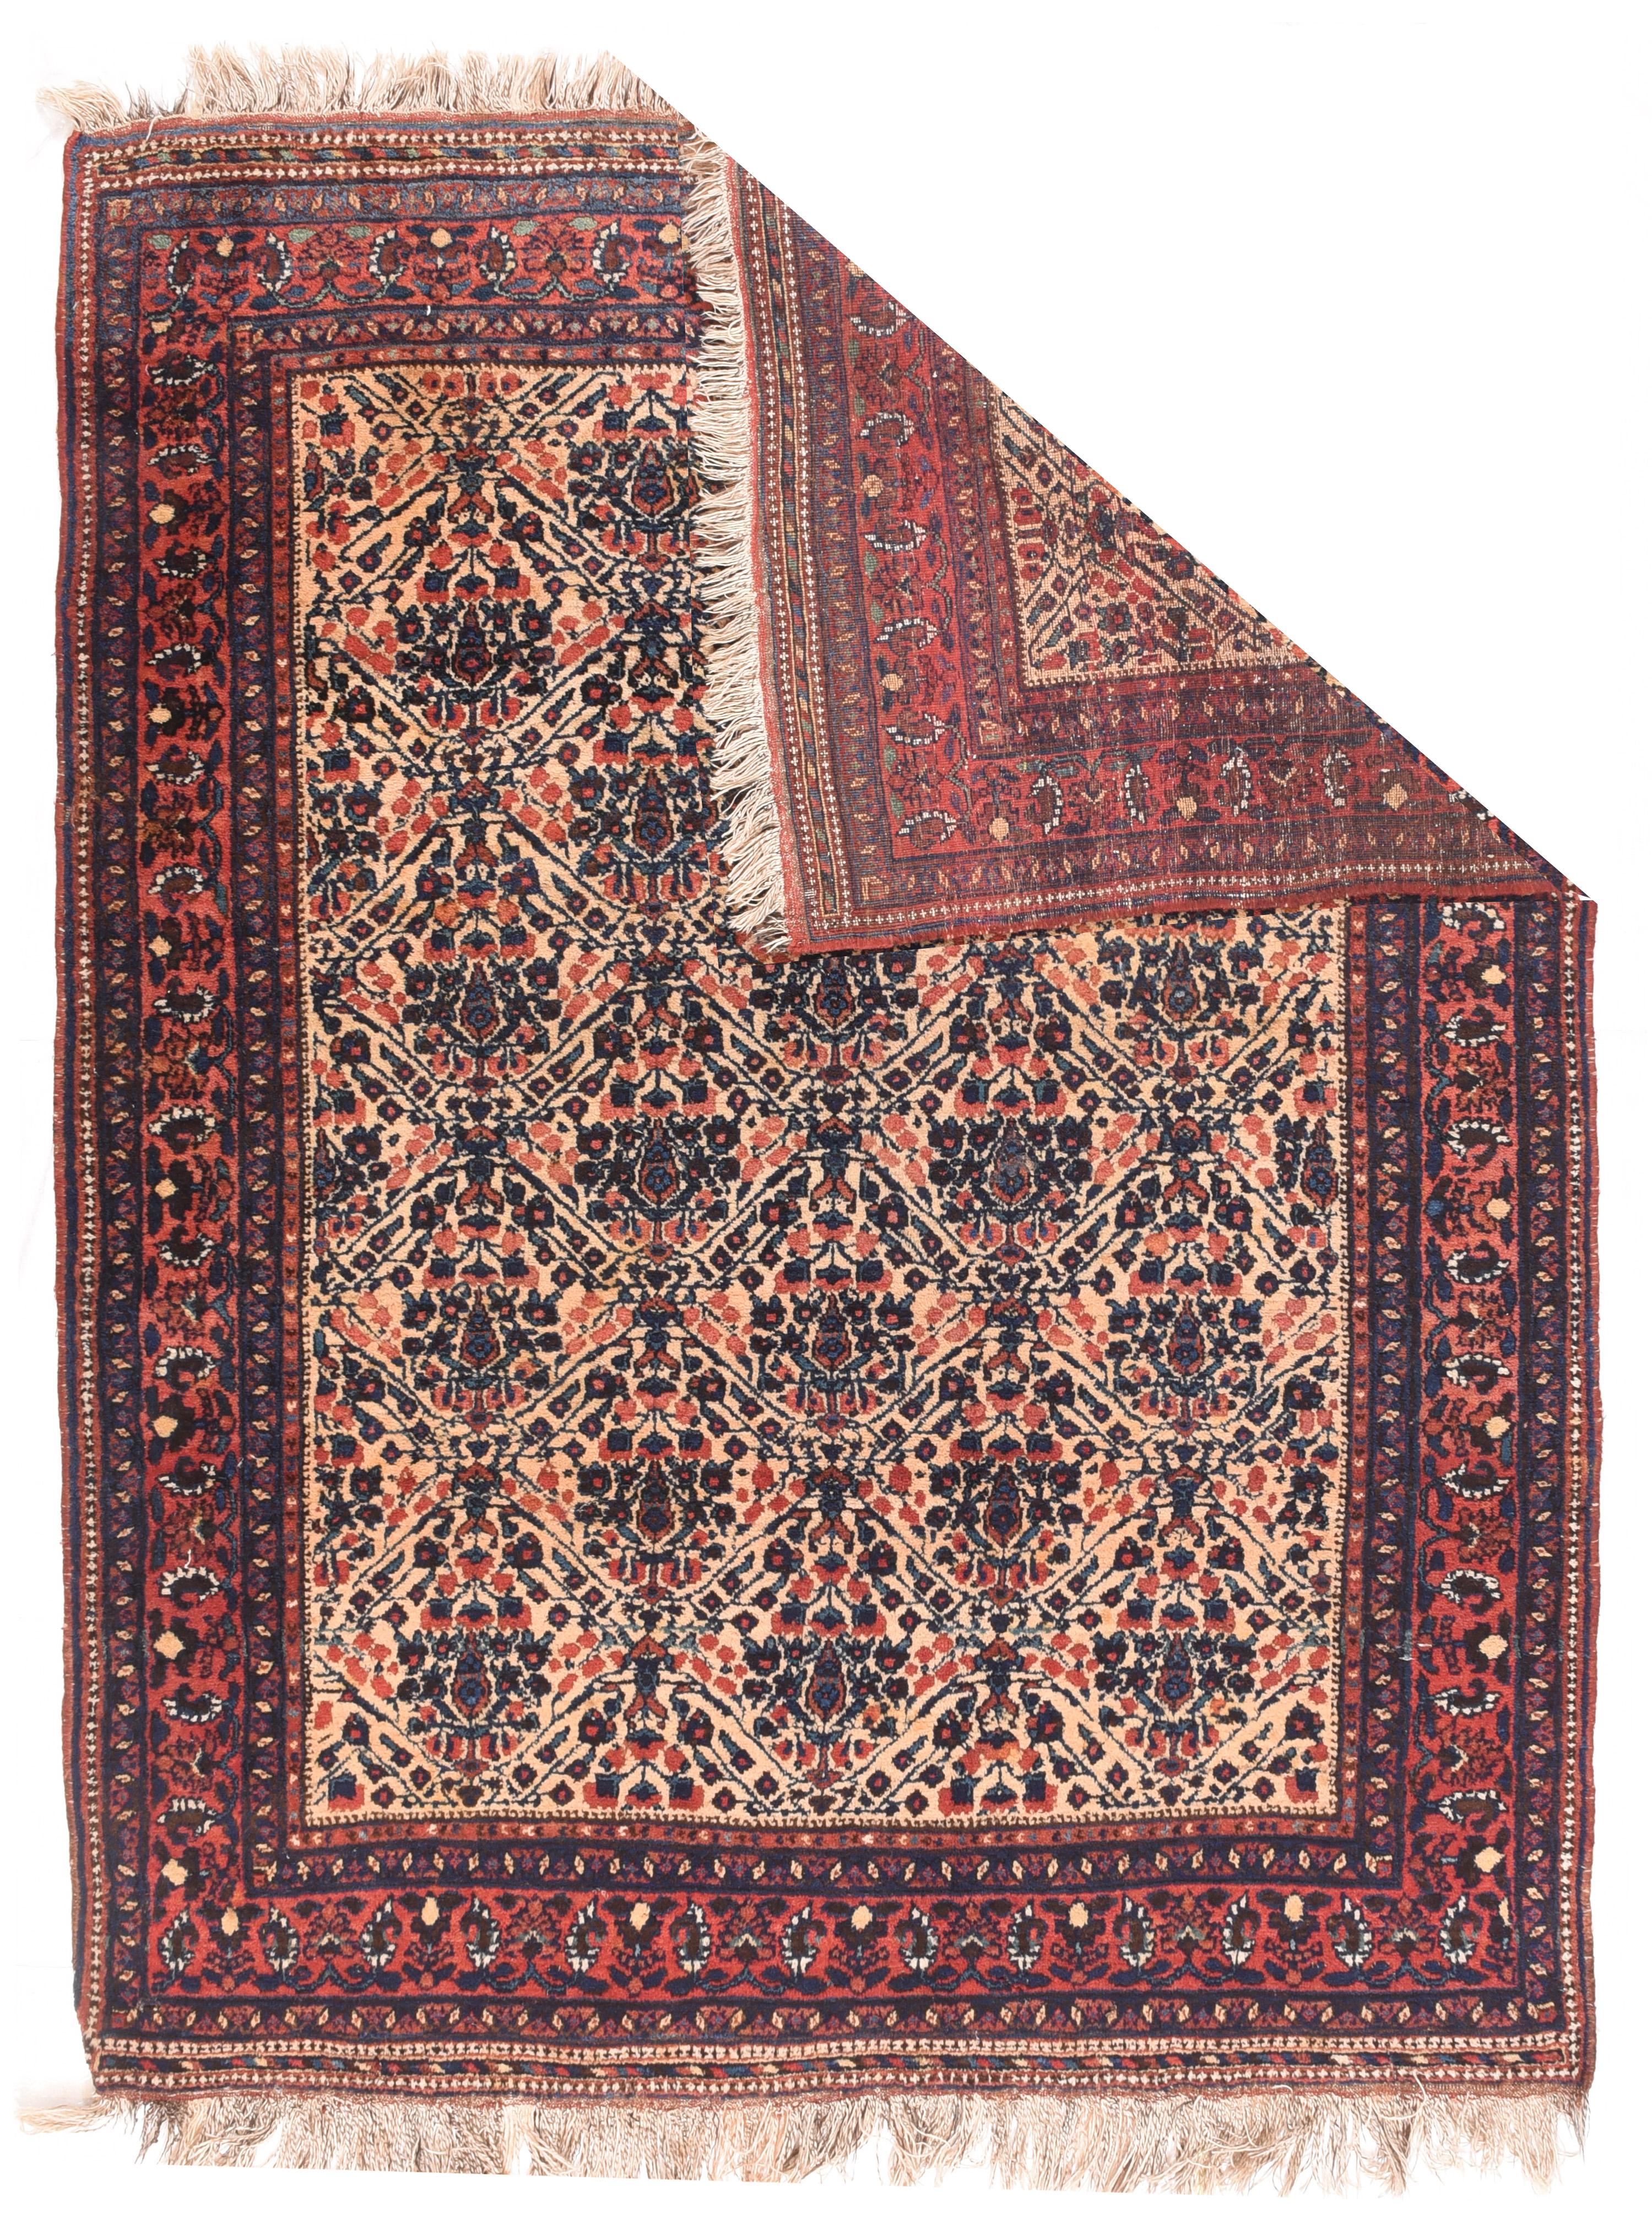 Now this is a true SE Persian antique tribal Afshar scatter with an ecru field displaying a lightly latticed one way half-drop, offset repeating cypress and floral pattern, within a coral rose border including botehs. Sumak stitch decorated extra